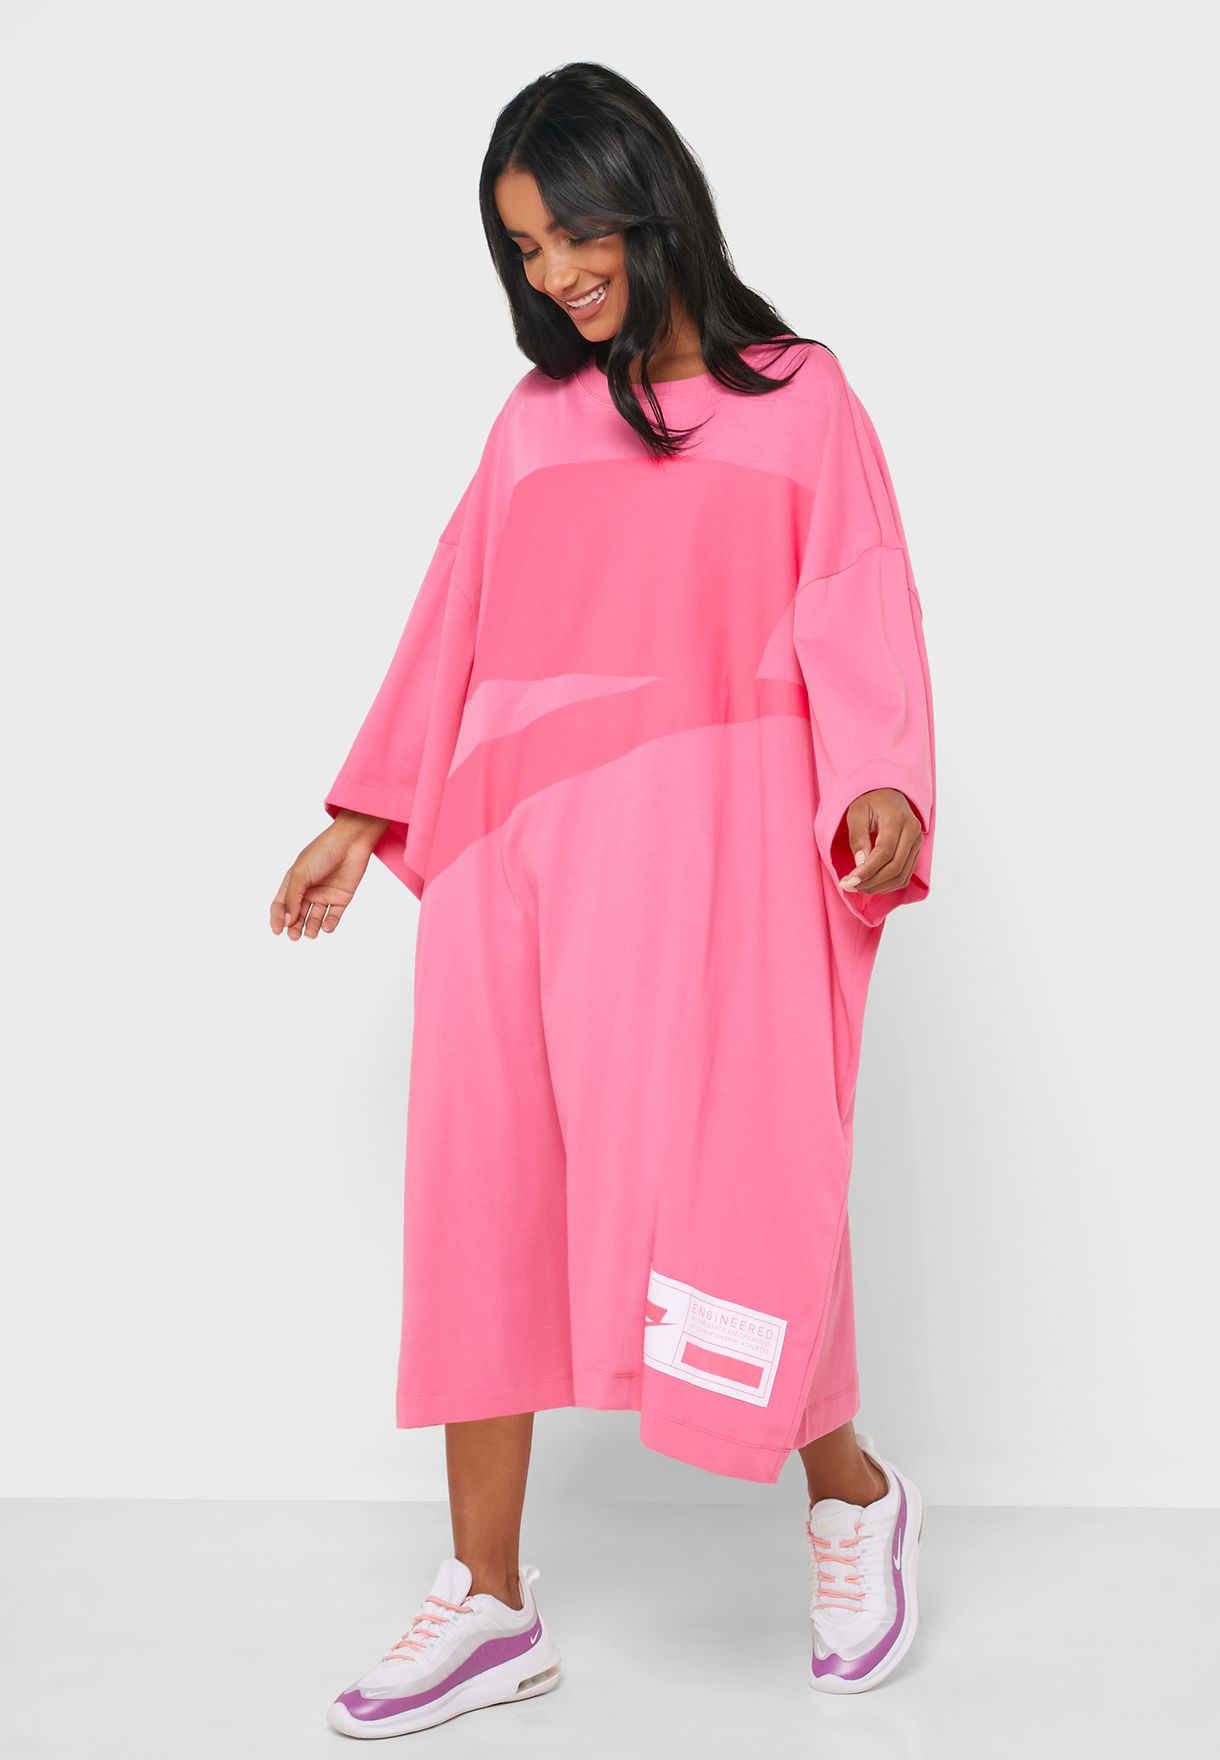 Buy Nike pink NSW Oversized Dress for 